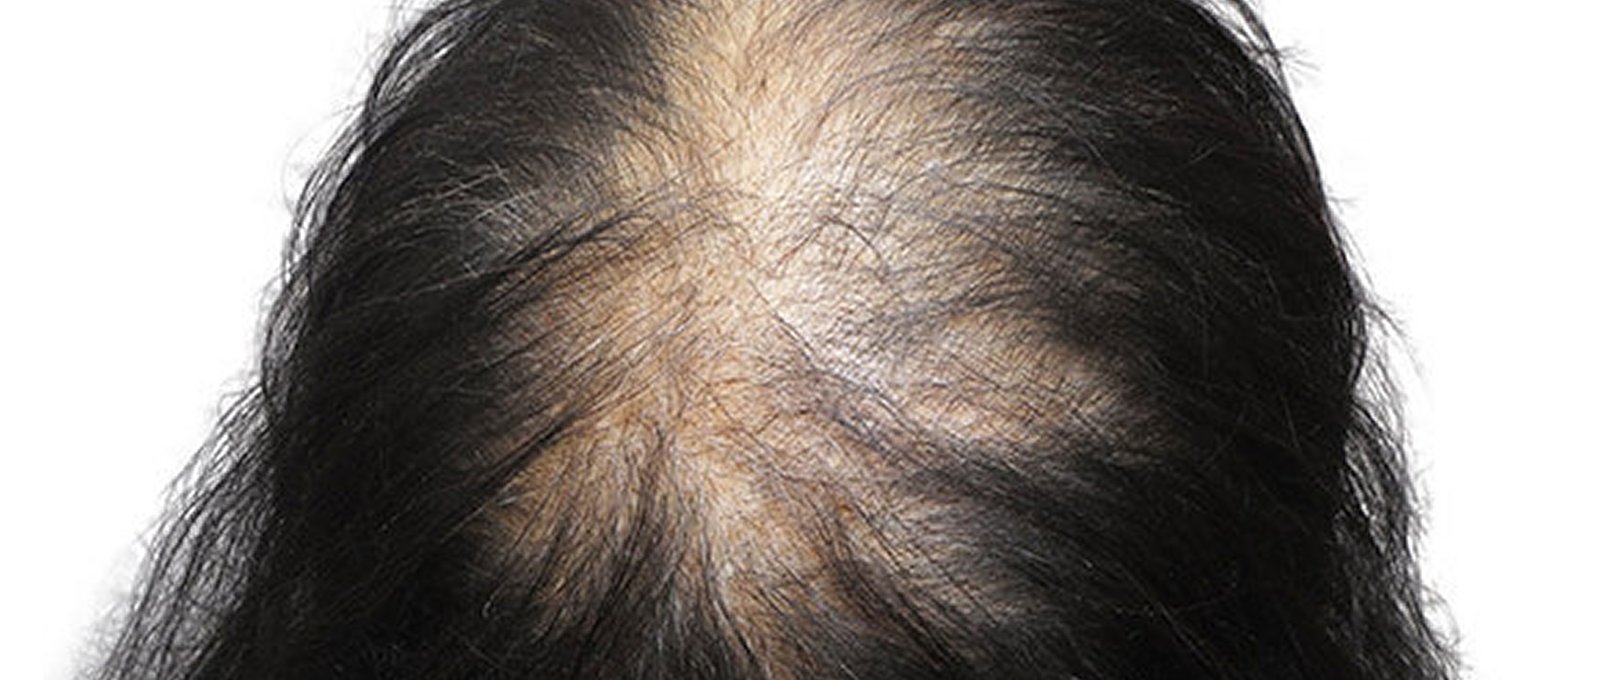 Most kinds of hair loss can be reversed naturally